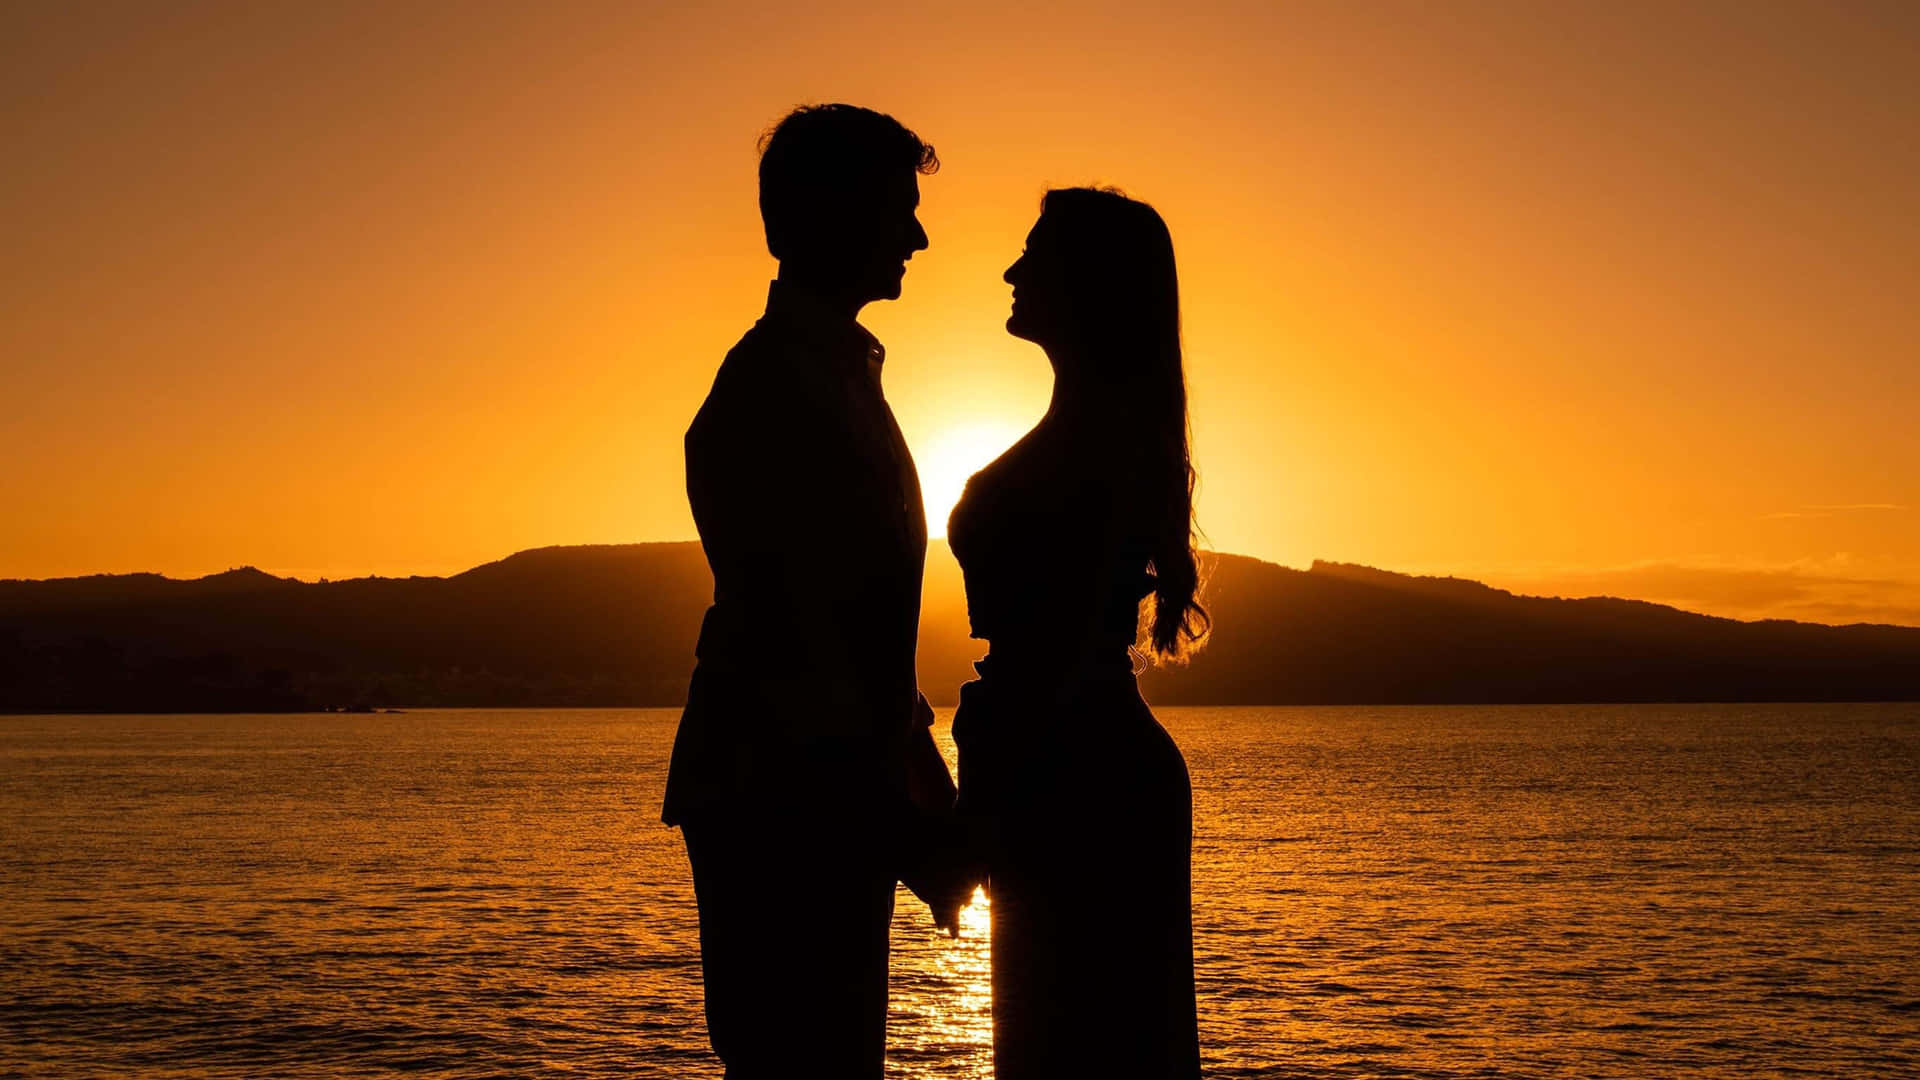 Sunset Couple Pictures Wallpaper